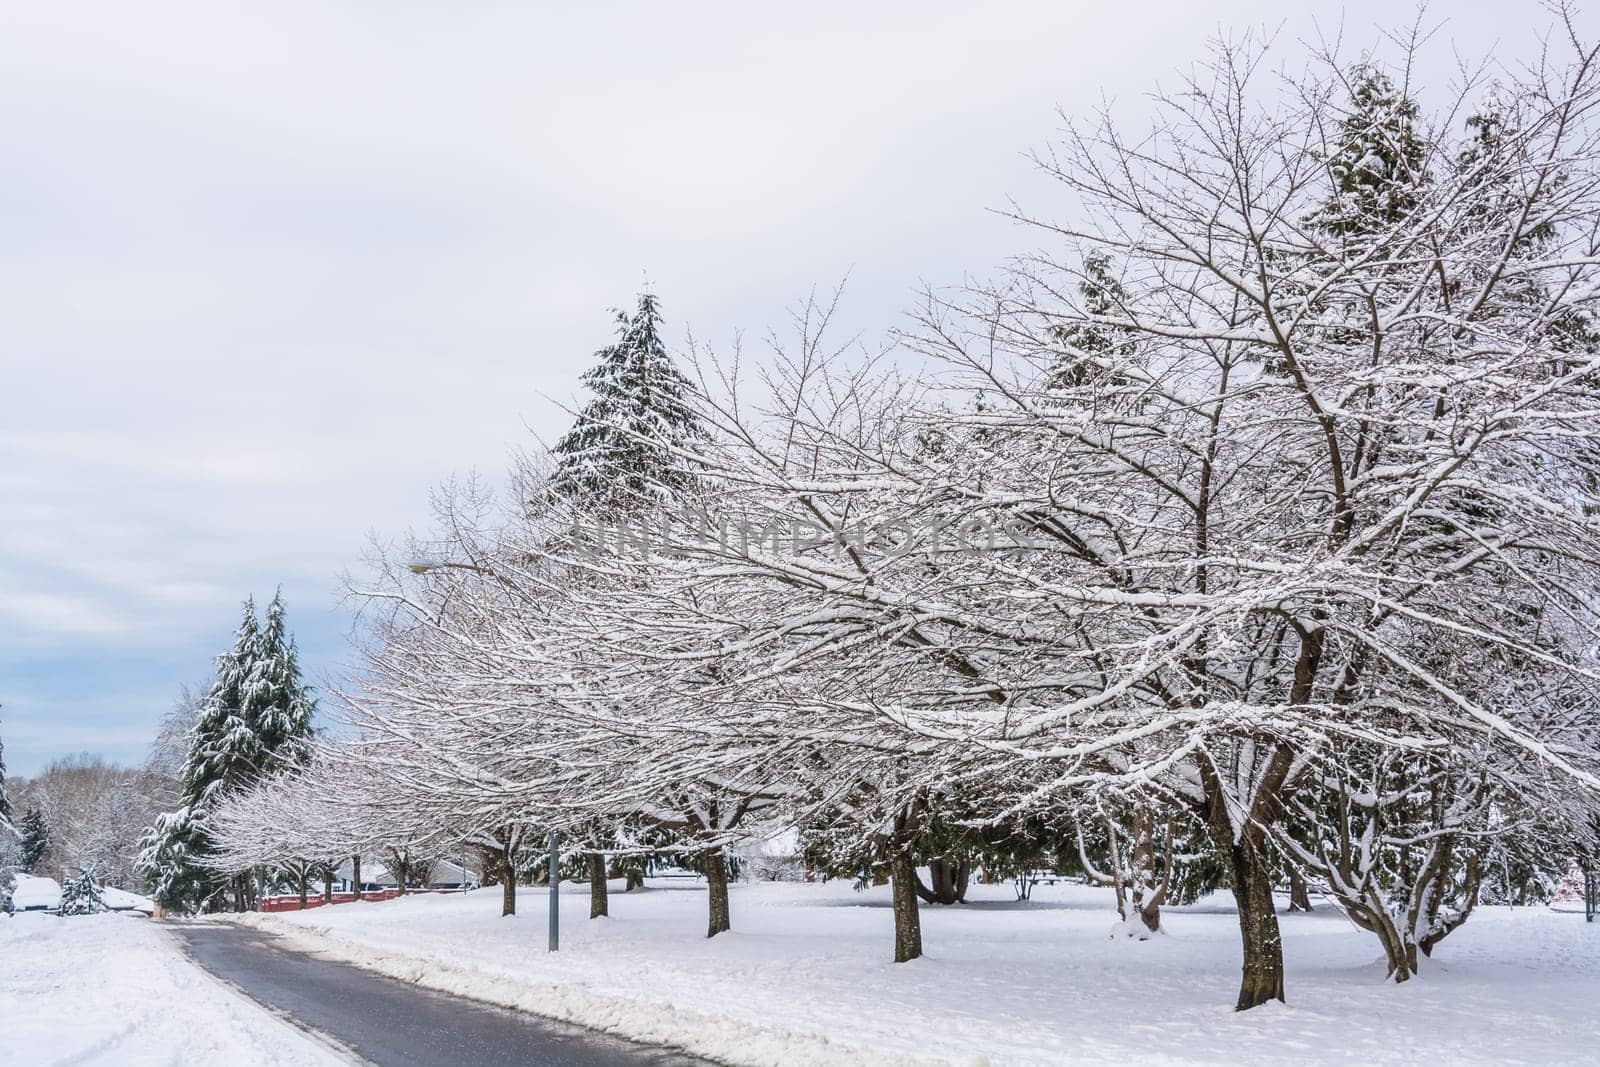 Snowed sacura trees on a street in winter Vancouver, Canada